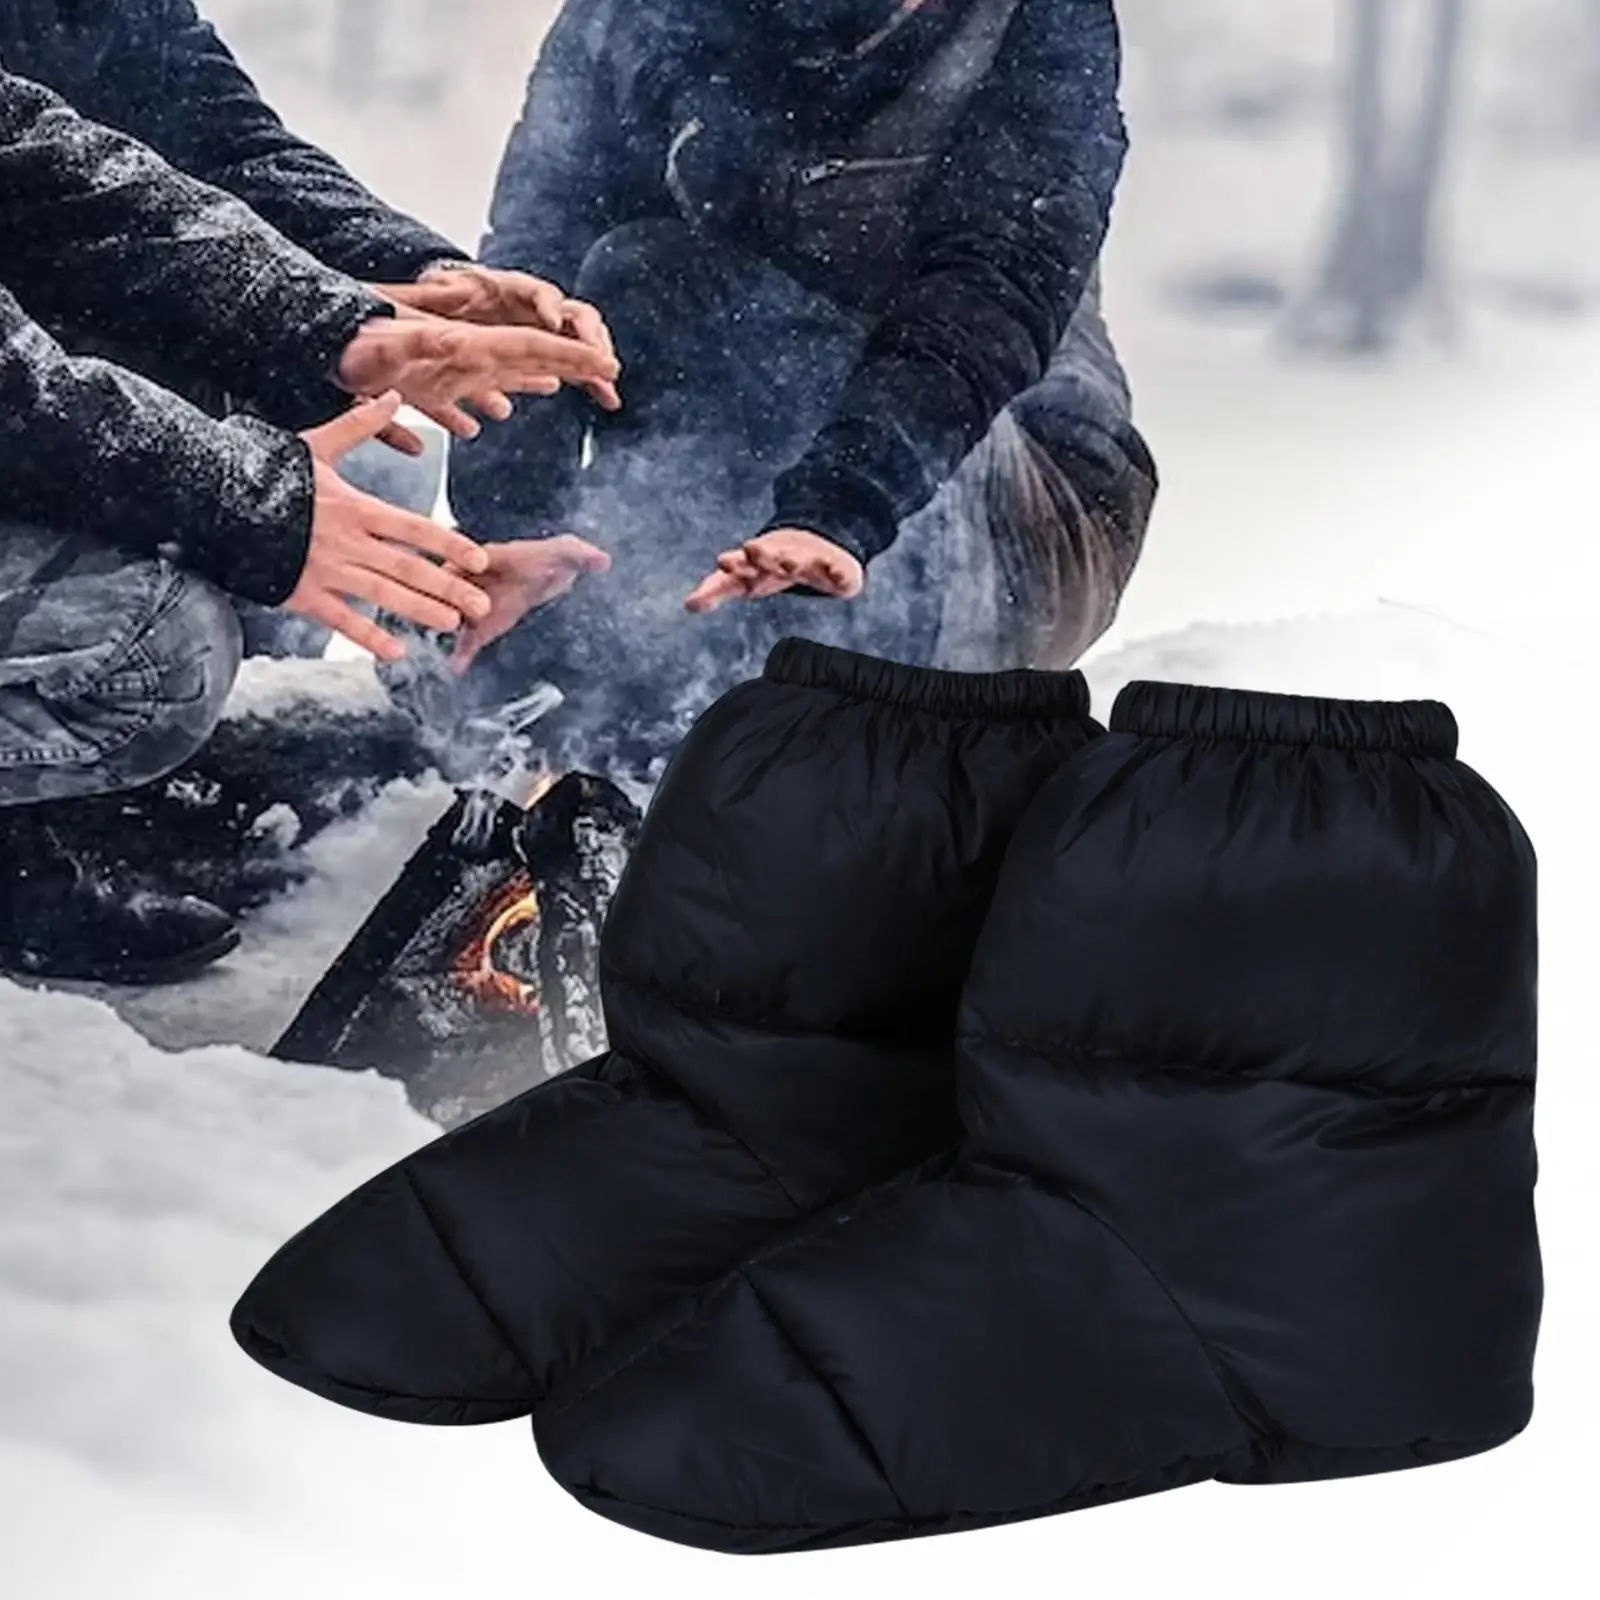 1 Pair Winter Down Slippers Bootie Shoes Soft Women Men Camp Tent Cozy Snow Boots for Backpacking Bedroom Camping Hiking Outdoor